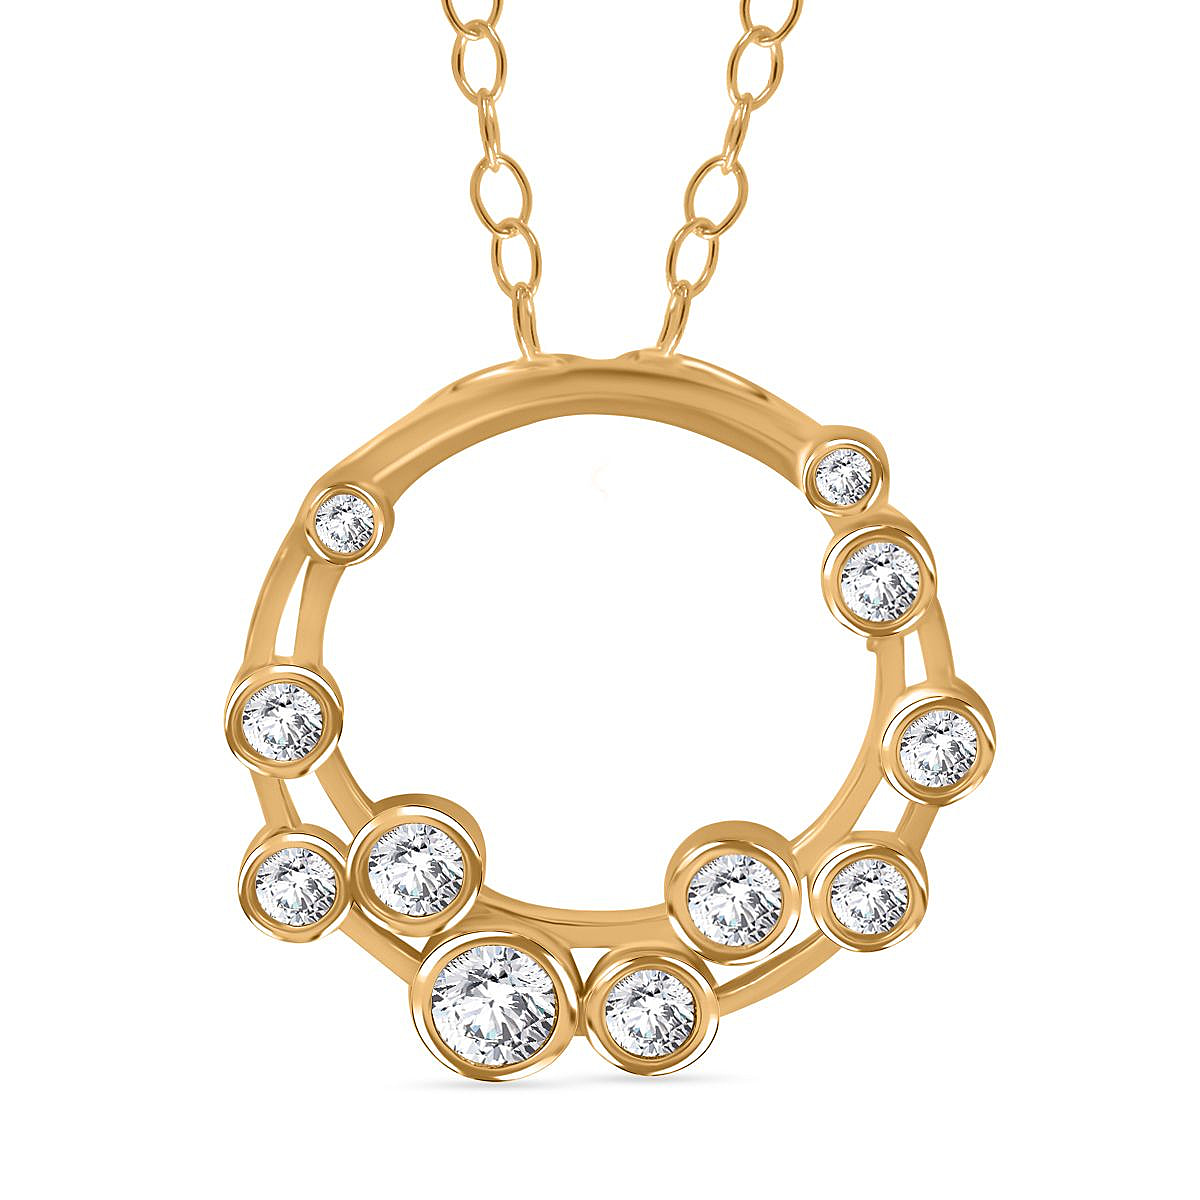 Designer Inspired - Moissanite Bubble Pendant with Chain (Size 20) in Vermeil YG Plated Sterling Silver